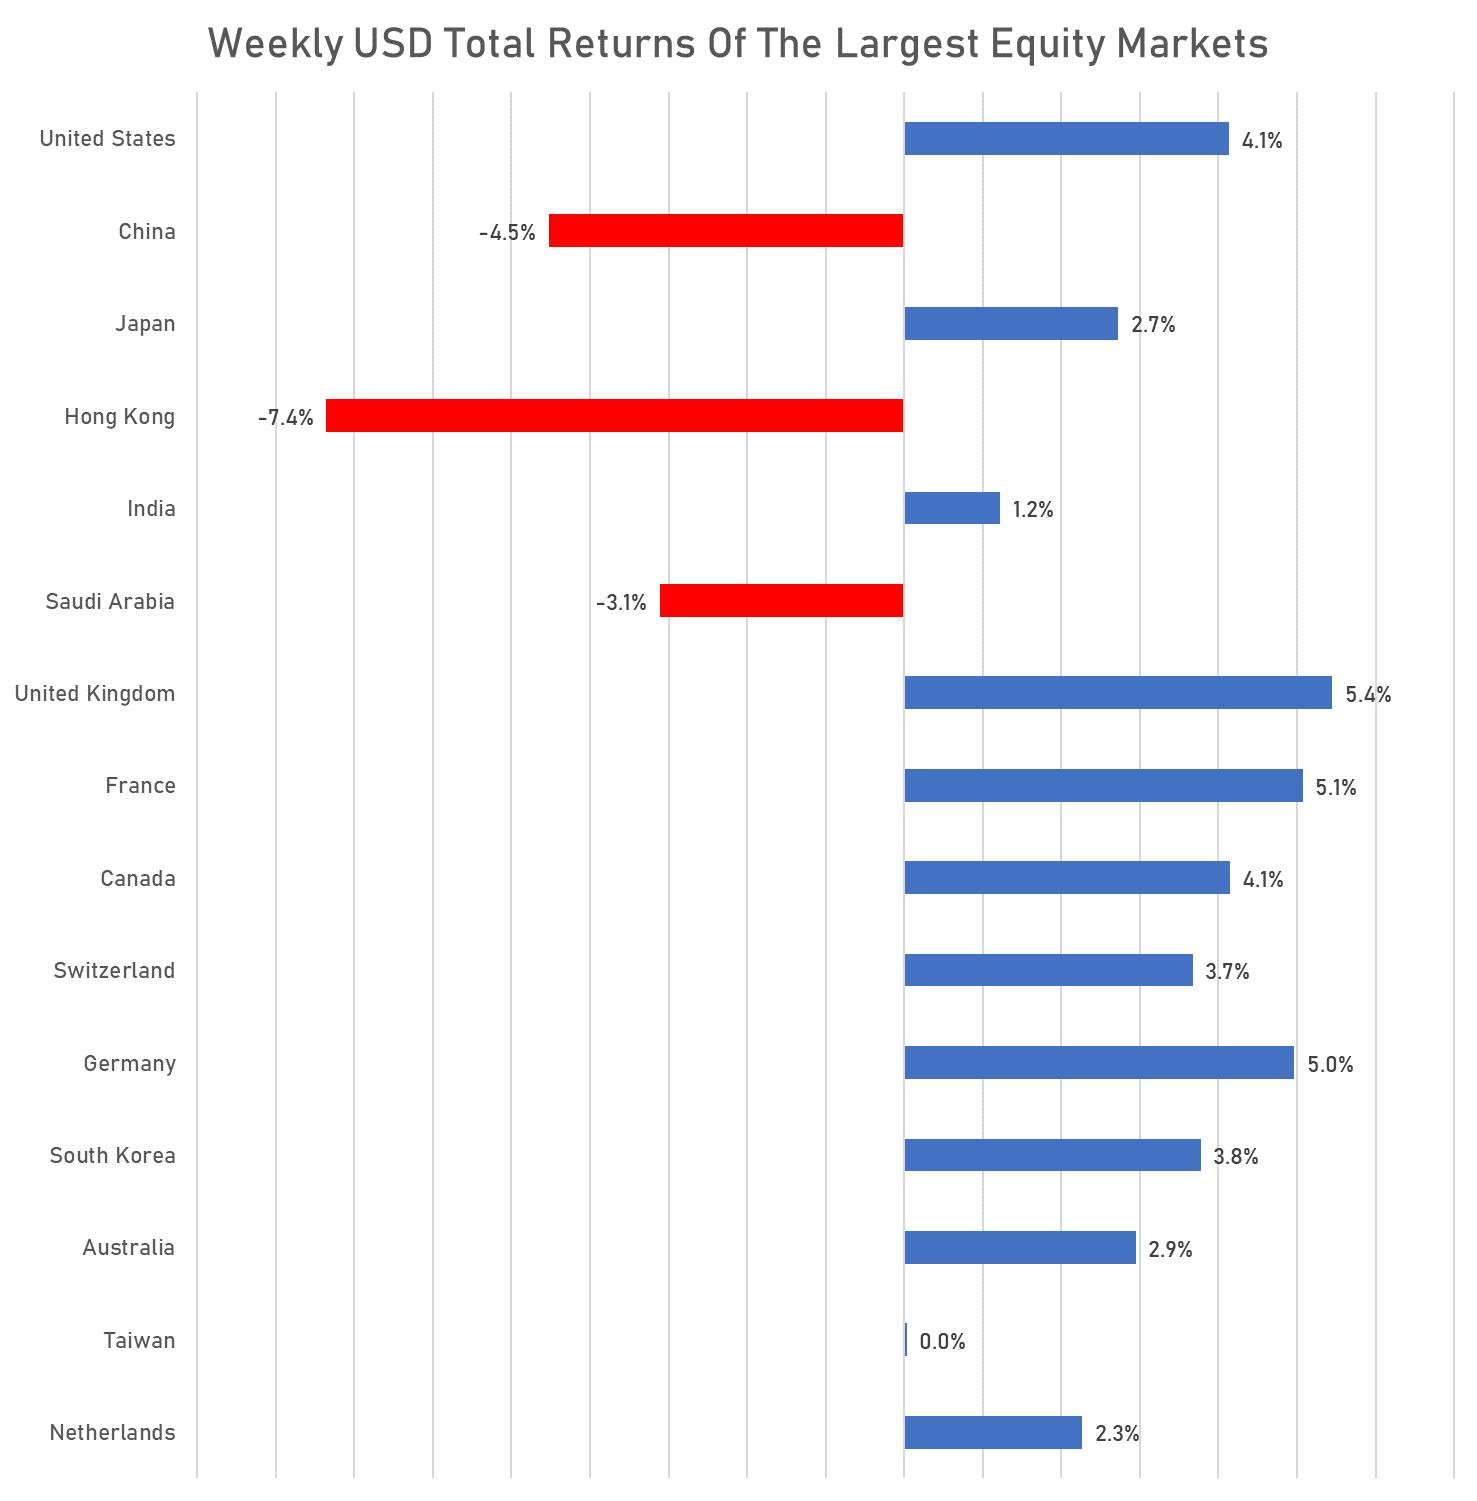 Weekly USD Total returns of major global equity markets | Sources: phipost.com, FactSet data